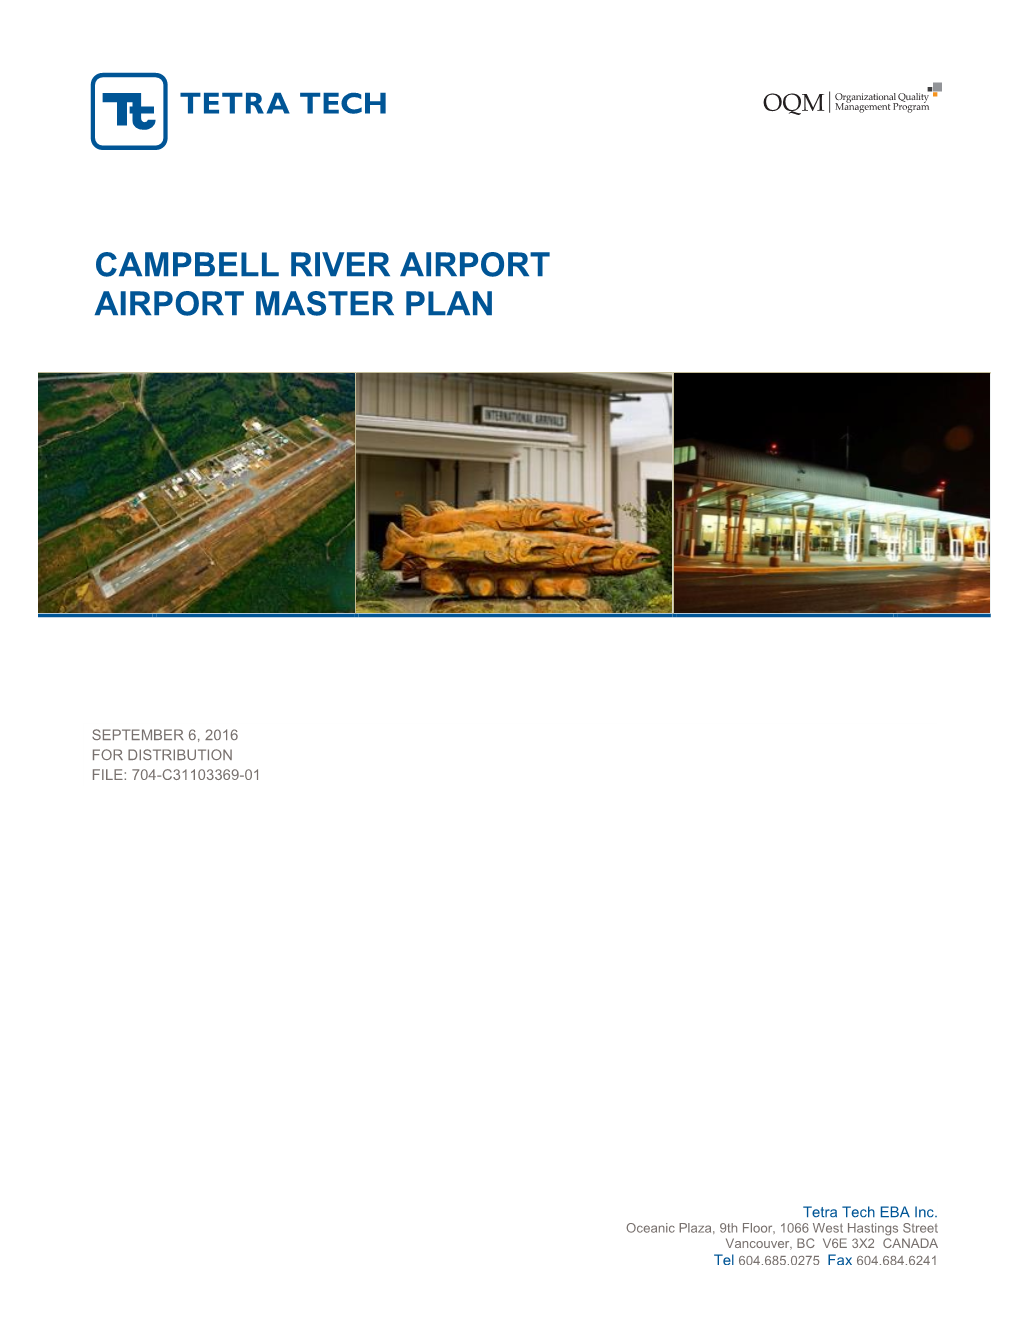 Campbell River Airport Airport Master Plan